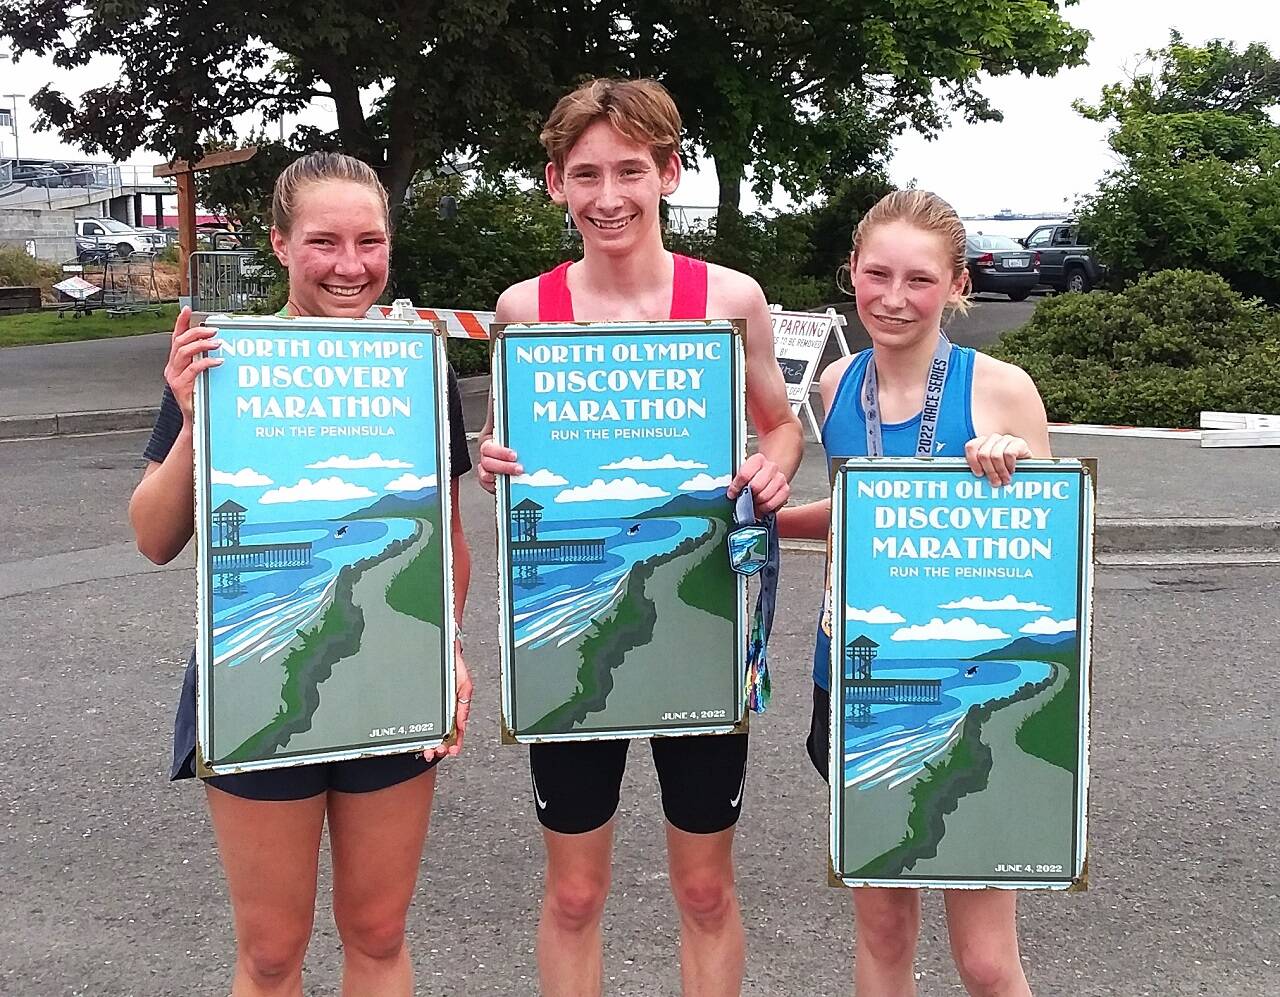 Lauren Larson, Langdon Larson and Leia Larson celebrate their victories at the North Olympic Discovery Marathon. Lauren won the women’s 10K, Langdon the men’s 10K and Leia the women’s 5K. (Pierre LaBossiere/Peninsula Daily News)